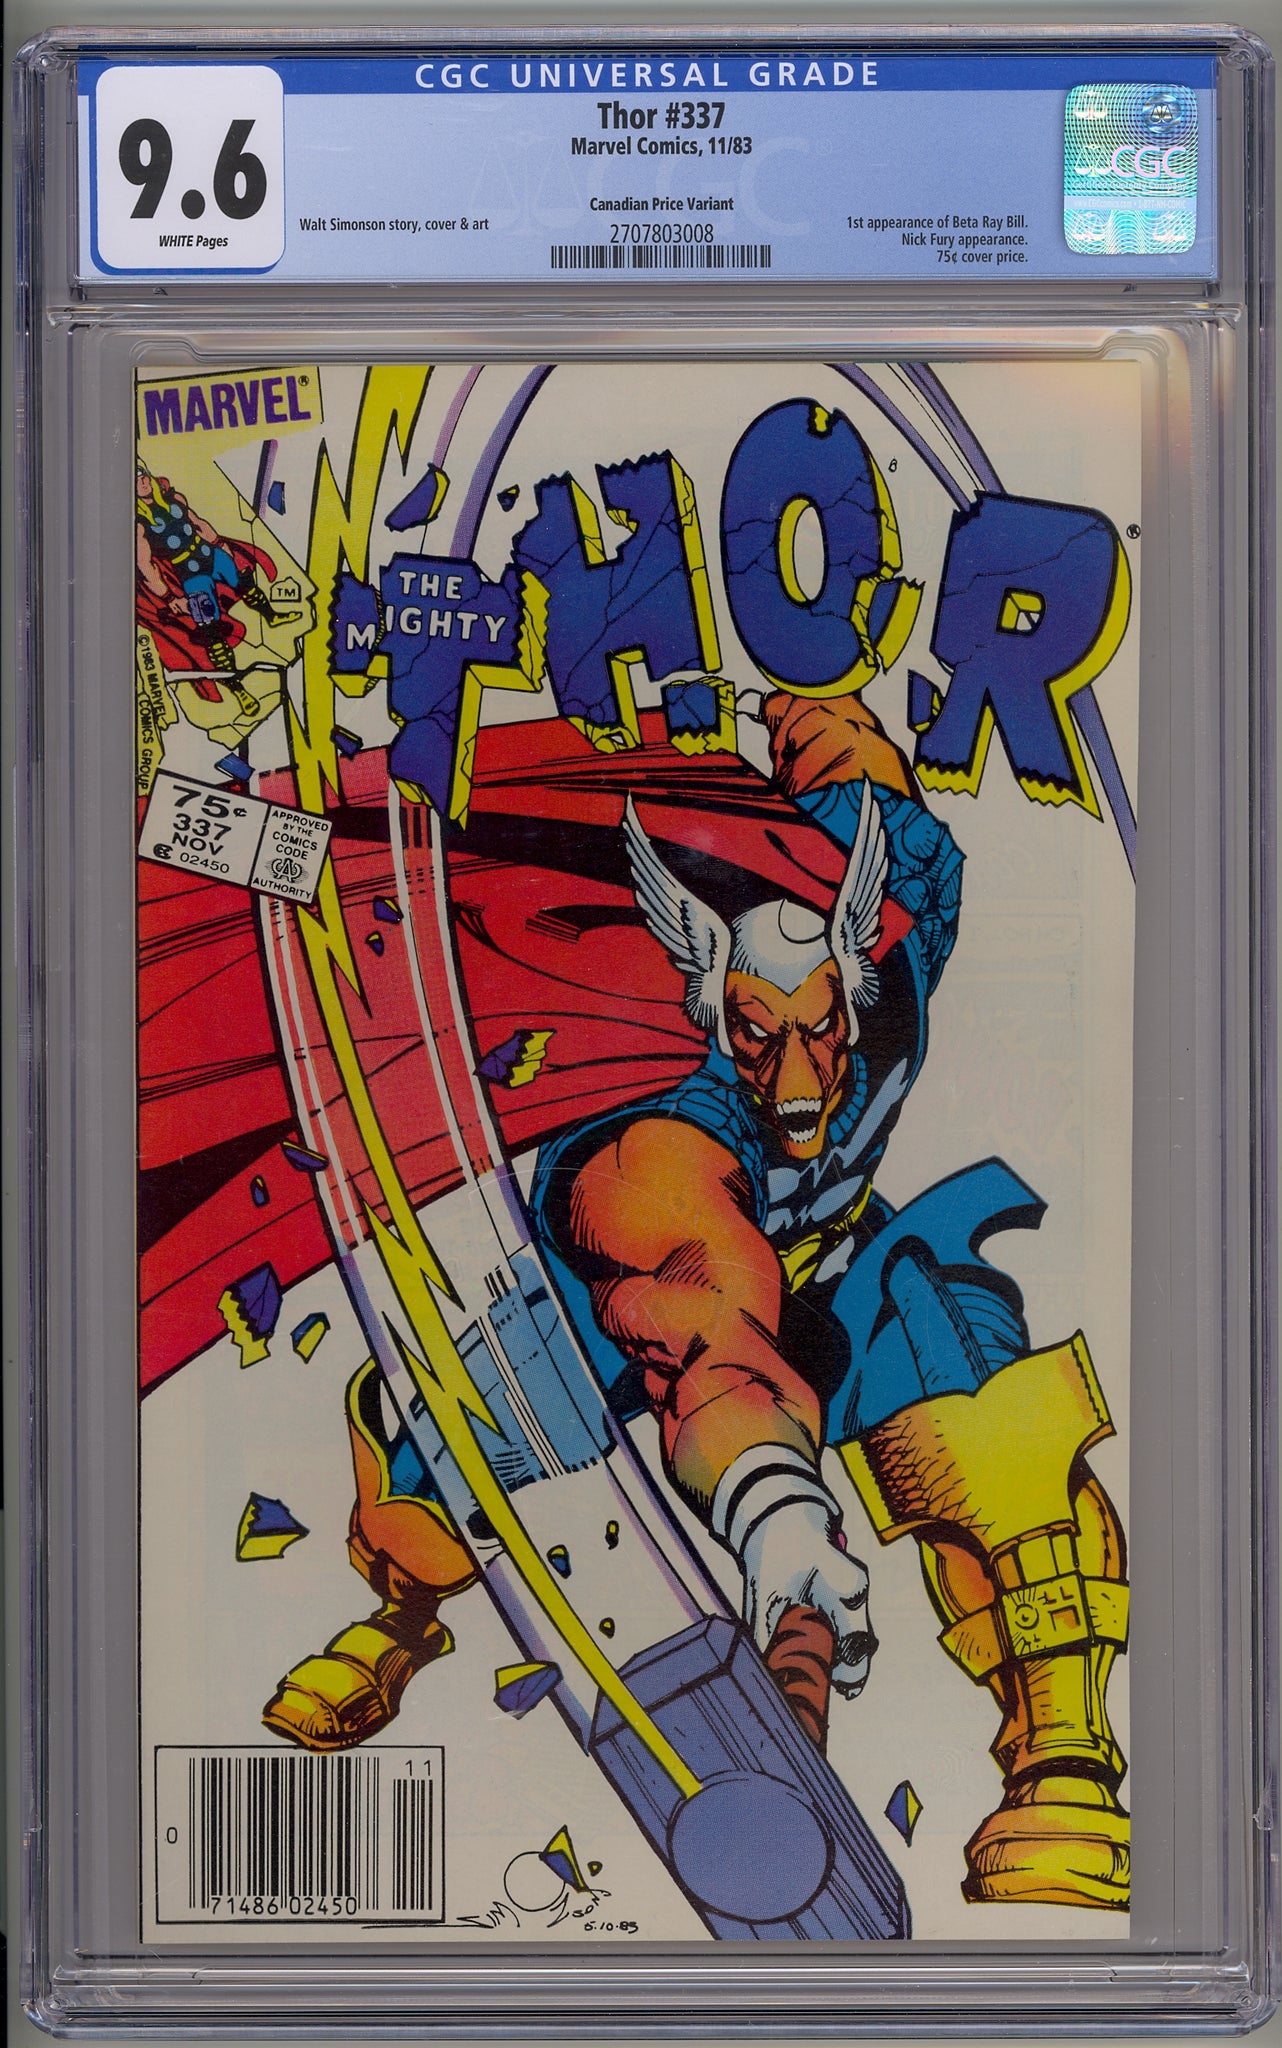 Thor, The Mighty #337 (1983) Beta Ray Bill, Canadian price variant